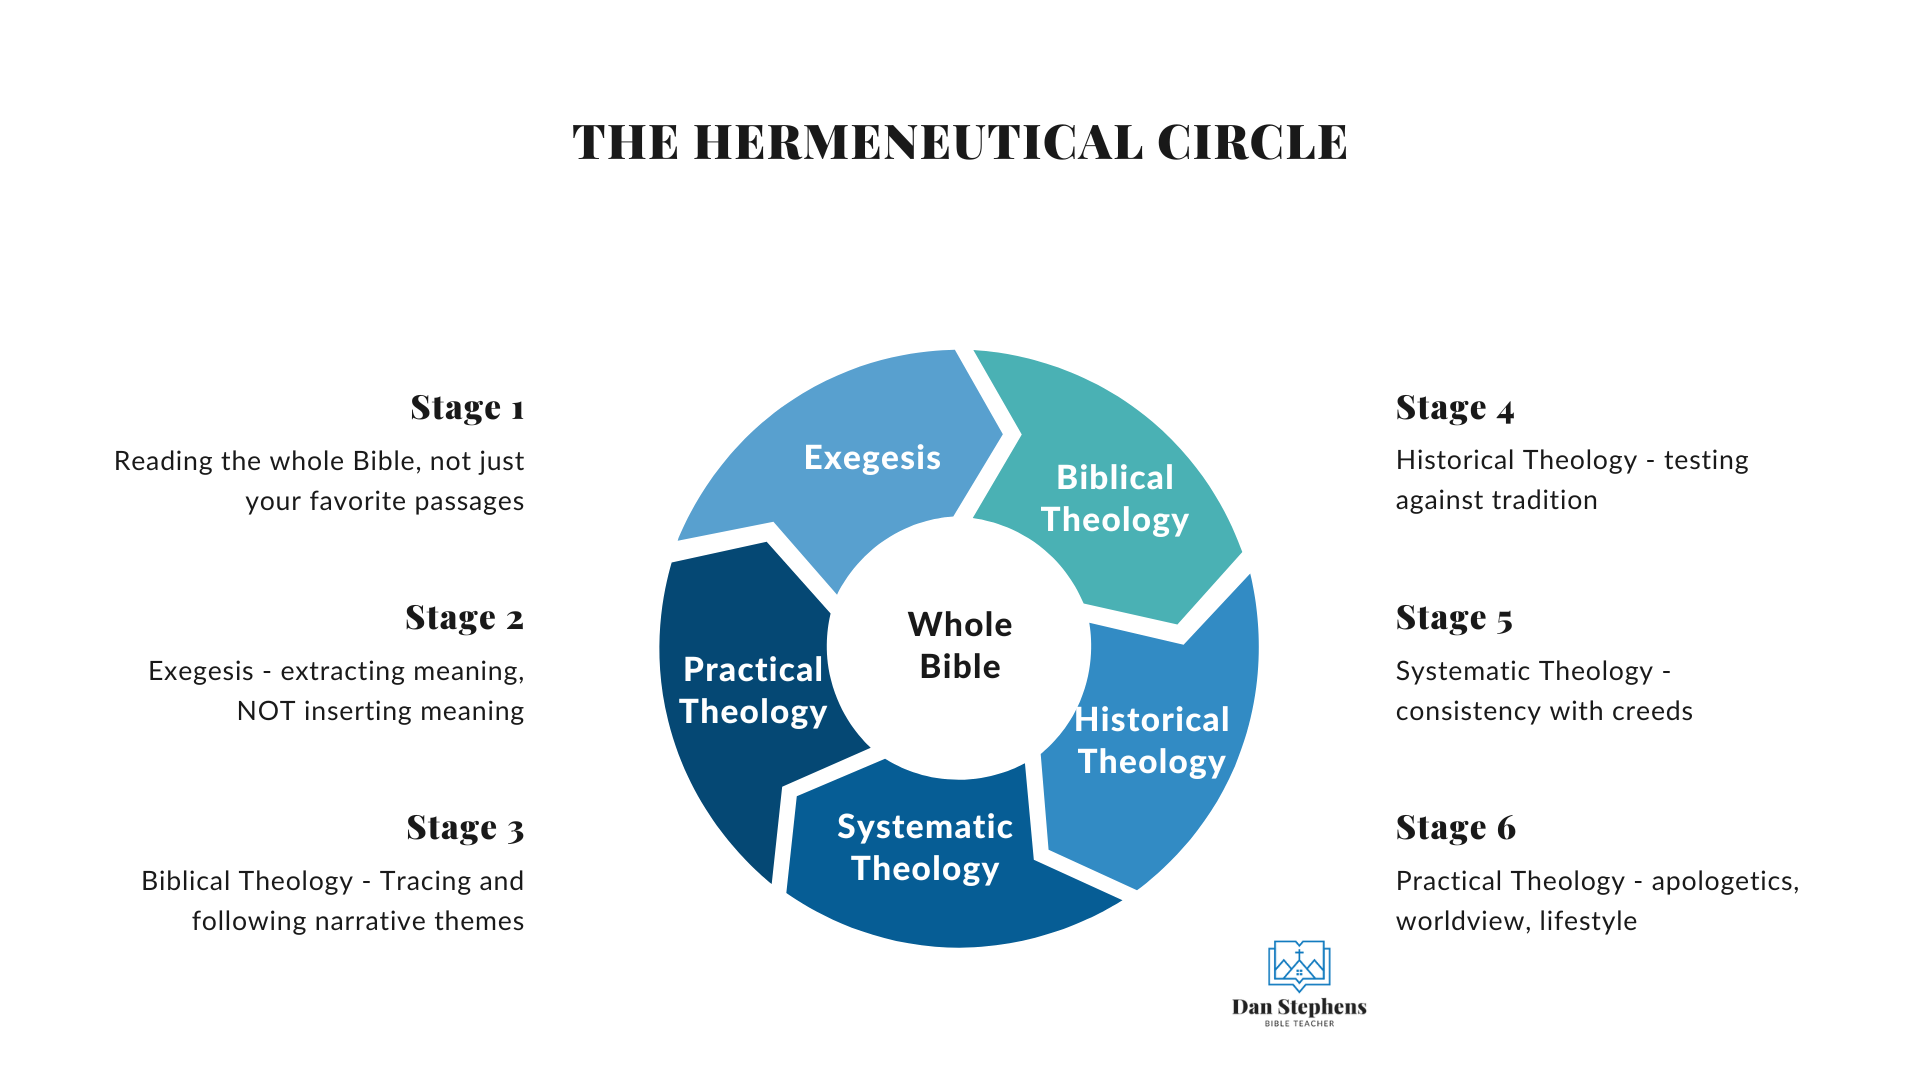 The Hermeneutical Circle Stage One: Read the whole Bible, not just your favorite passages. Stage Two: Exegesis - extracting meaning, not inserting meaning. Stage Three: Biblical Theology - tracing and following narrative themes of the Bible. Stage Four: Historical Theolgoy - testing against tradition. Stage Five: Systematic Theology - consistency with creeds. Stage Six: Practical Theology - putting our conclusions into action through apologetics, worldview, and lifestyle.